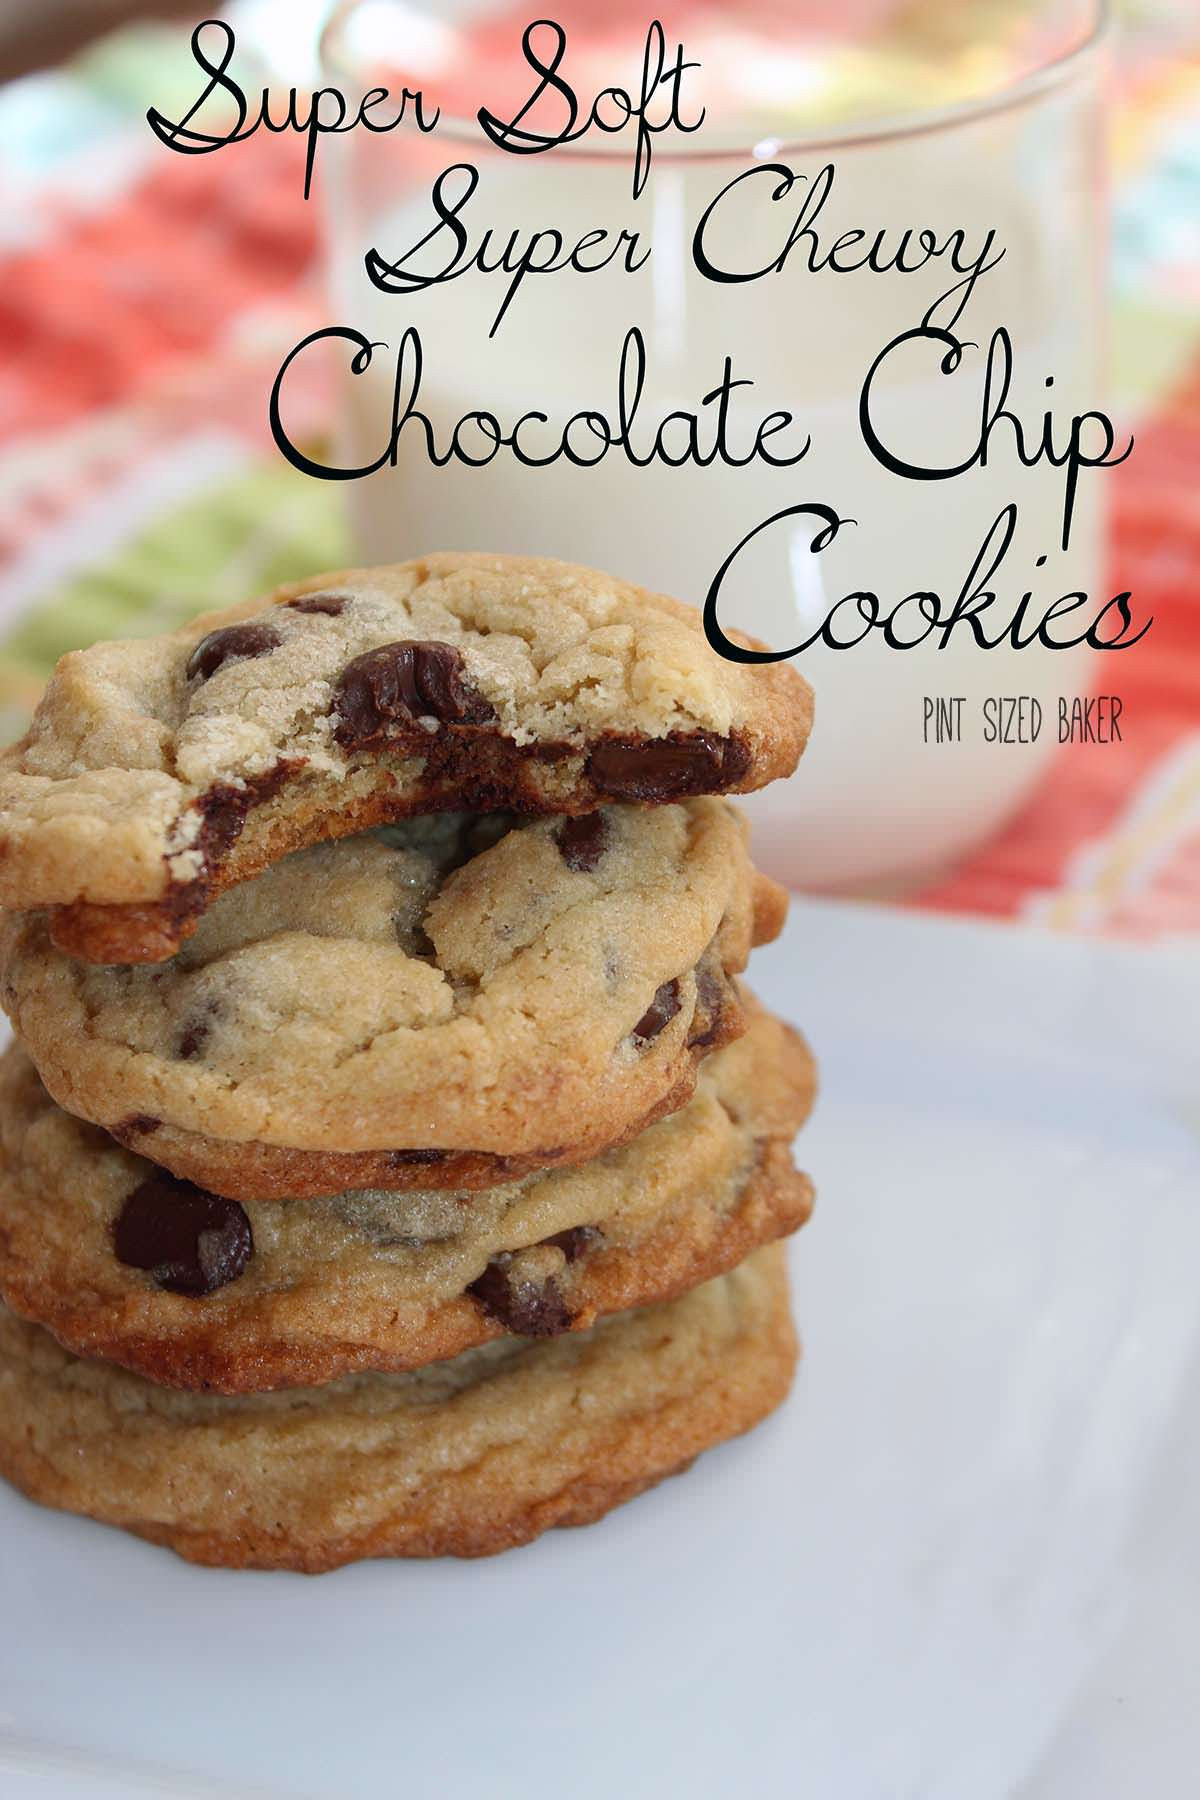 How To Make Chewy Chocolate Chip Cookies
 Soft and Chewy Chocolate Chip Cookies Pint Sized Baker